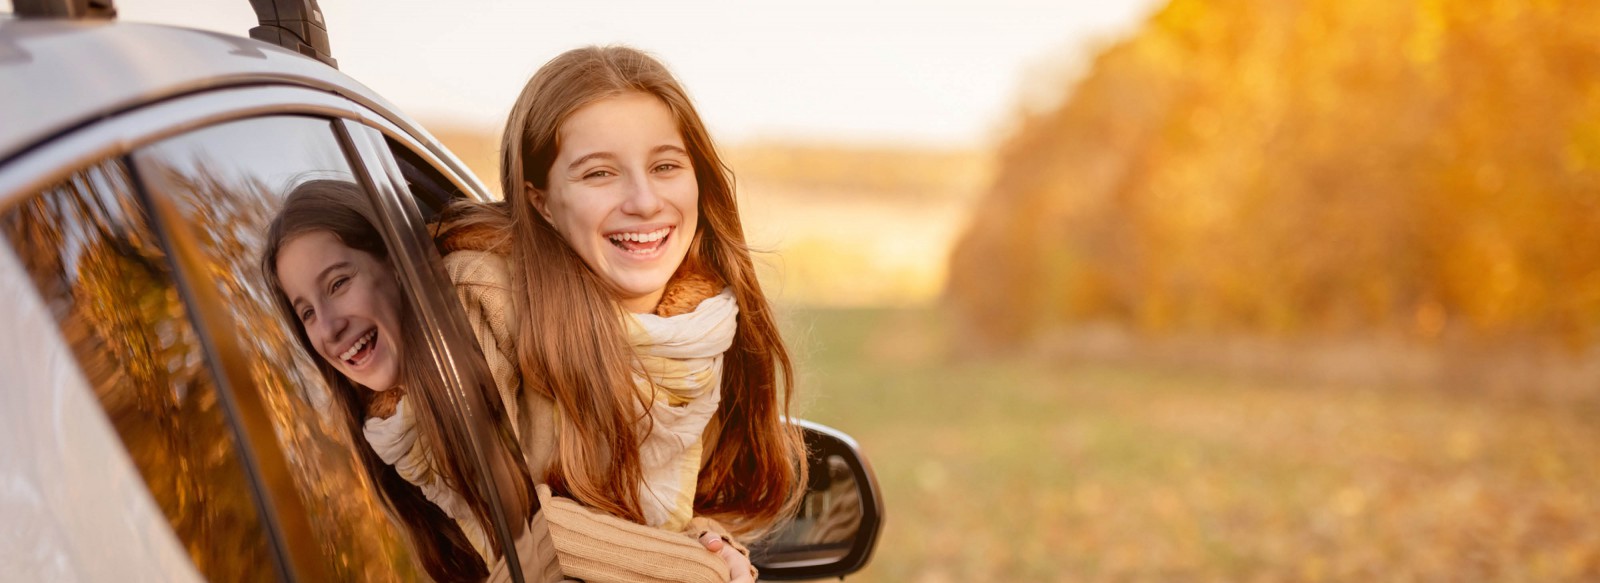 Girl in new car during fall